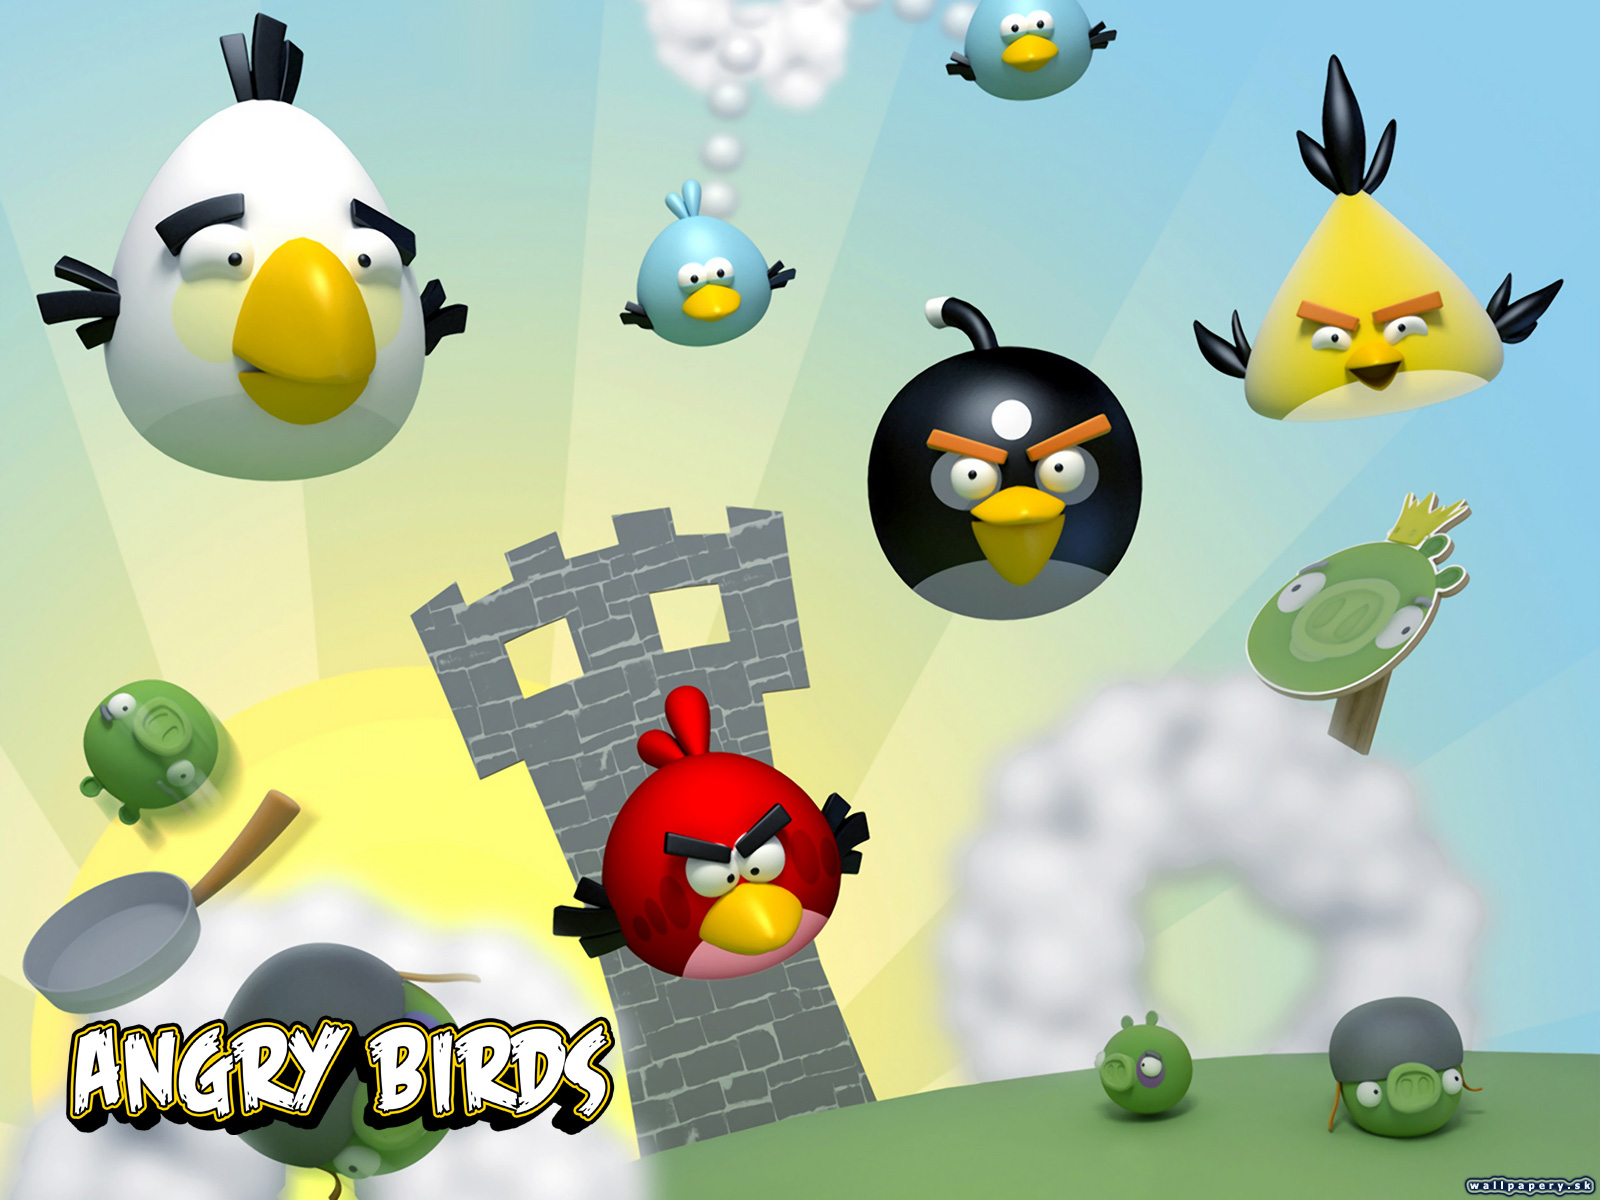 Angry Birds - wallpaper 6